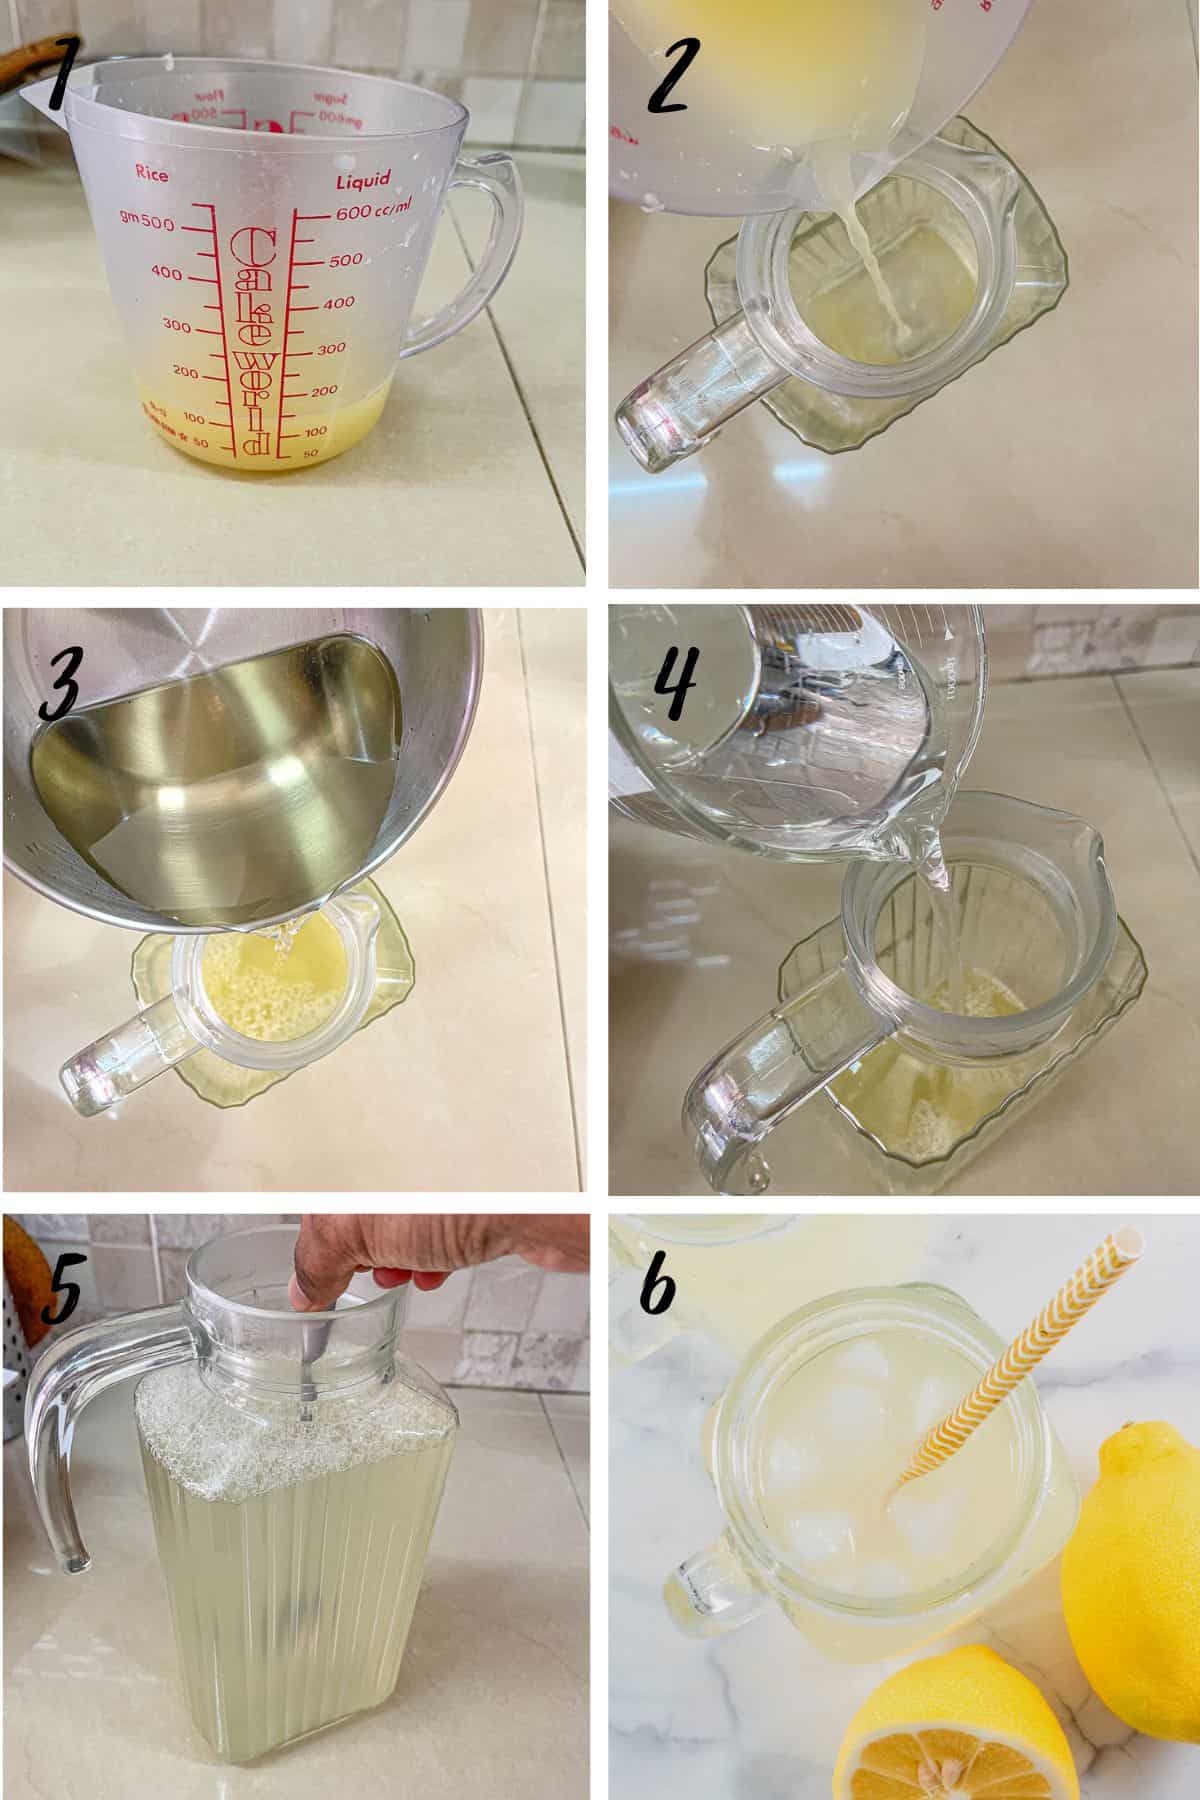 A poster of 6 images showing how to measure lemon juice, water and simple syrup into a pitcher to make lemonade.